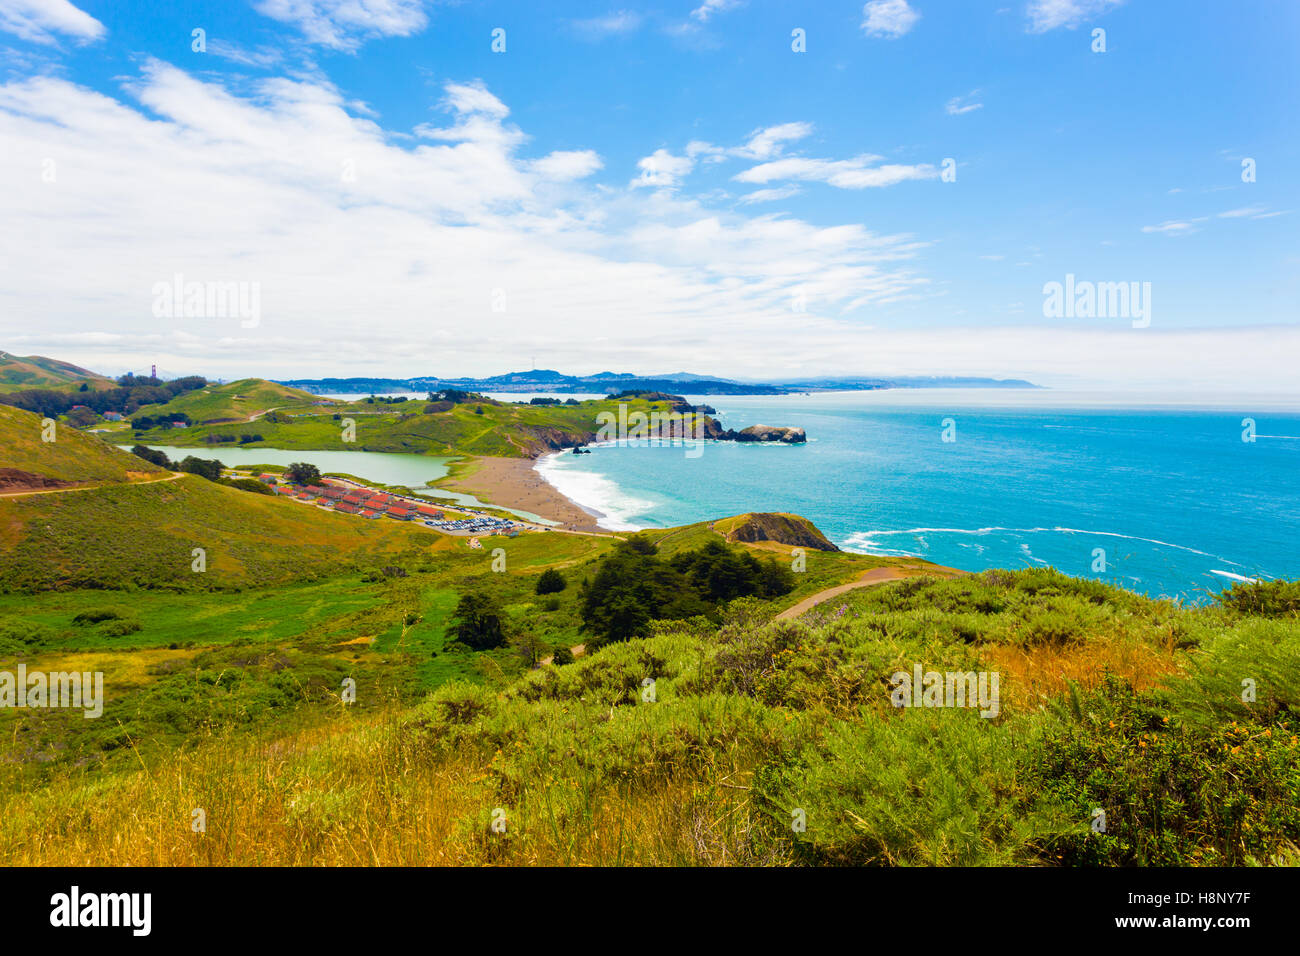 San Francisco in distant background seen from atop the Marin Headlands above Fort Cronkhite and Rodeo Beach along the coast Stock Photo